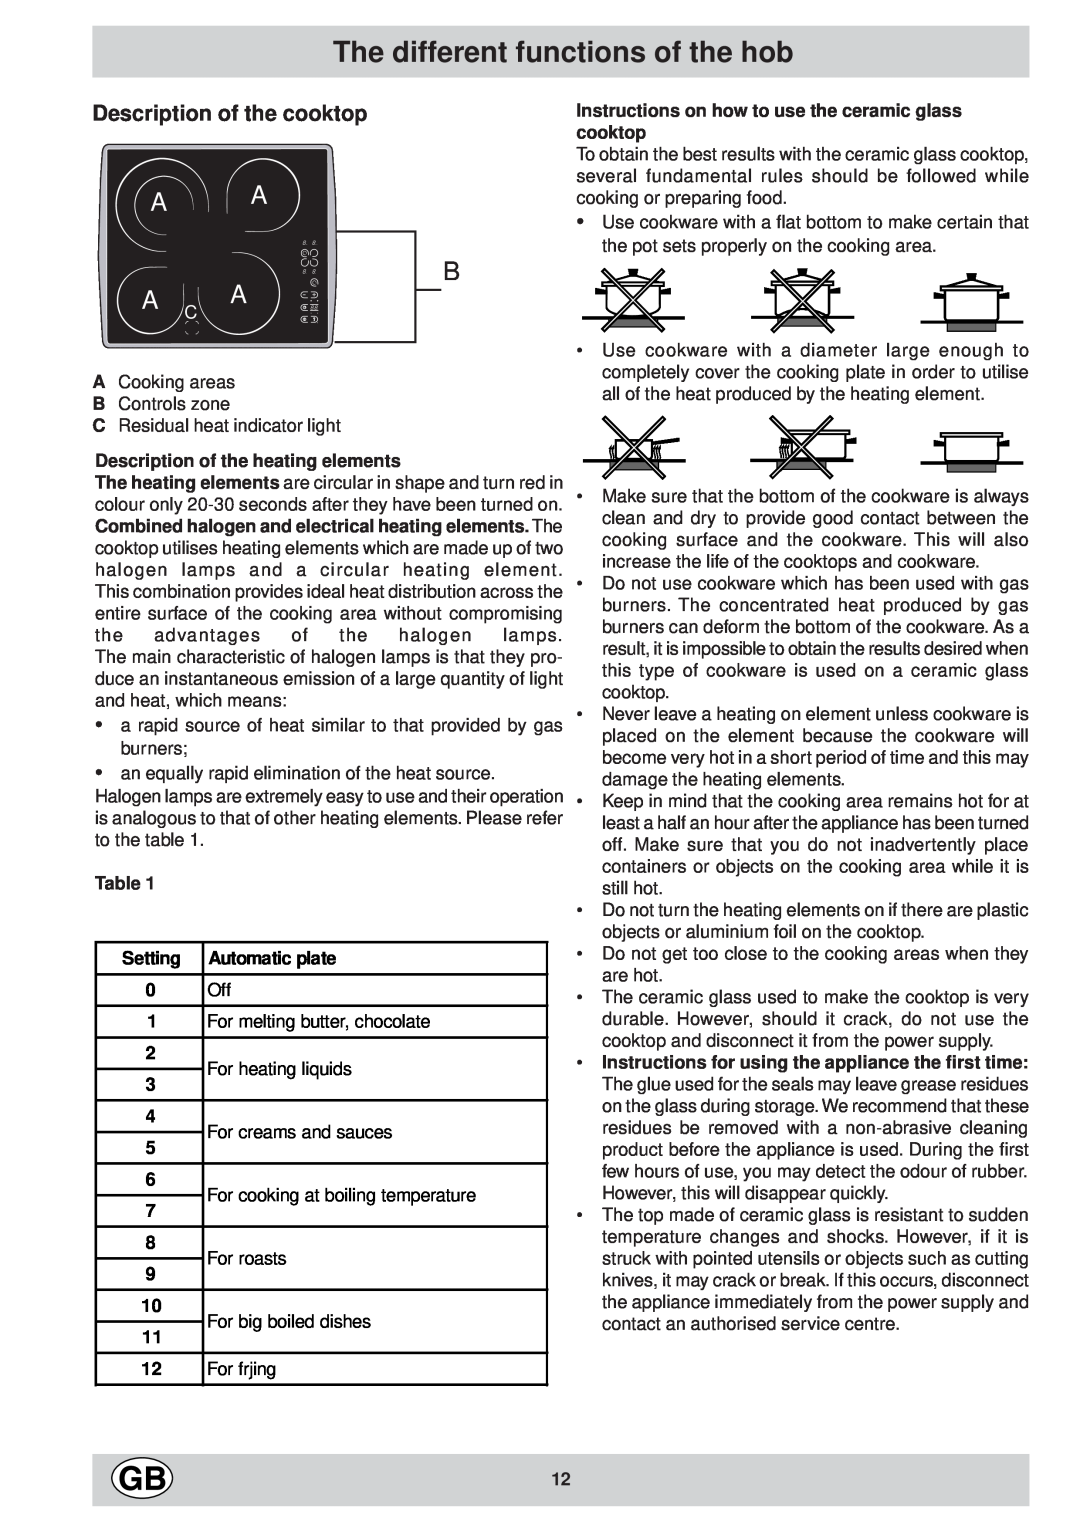 Ariston KT 8104 QO manual The different functions of the hob, Description of the heating elements, Setting, Automatic plate 